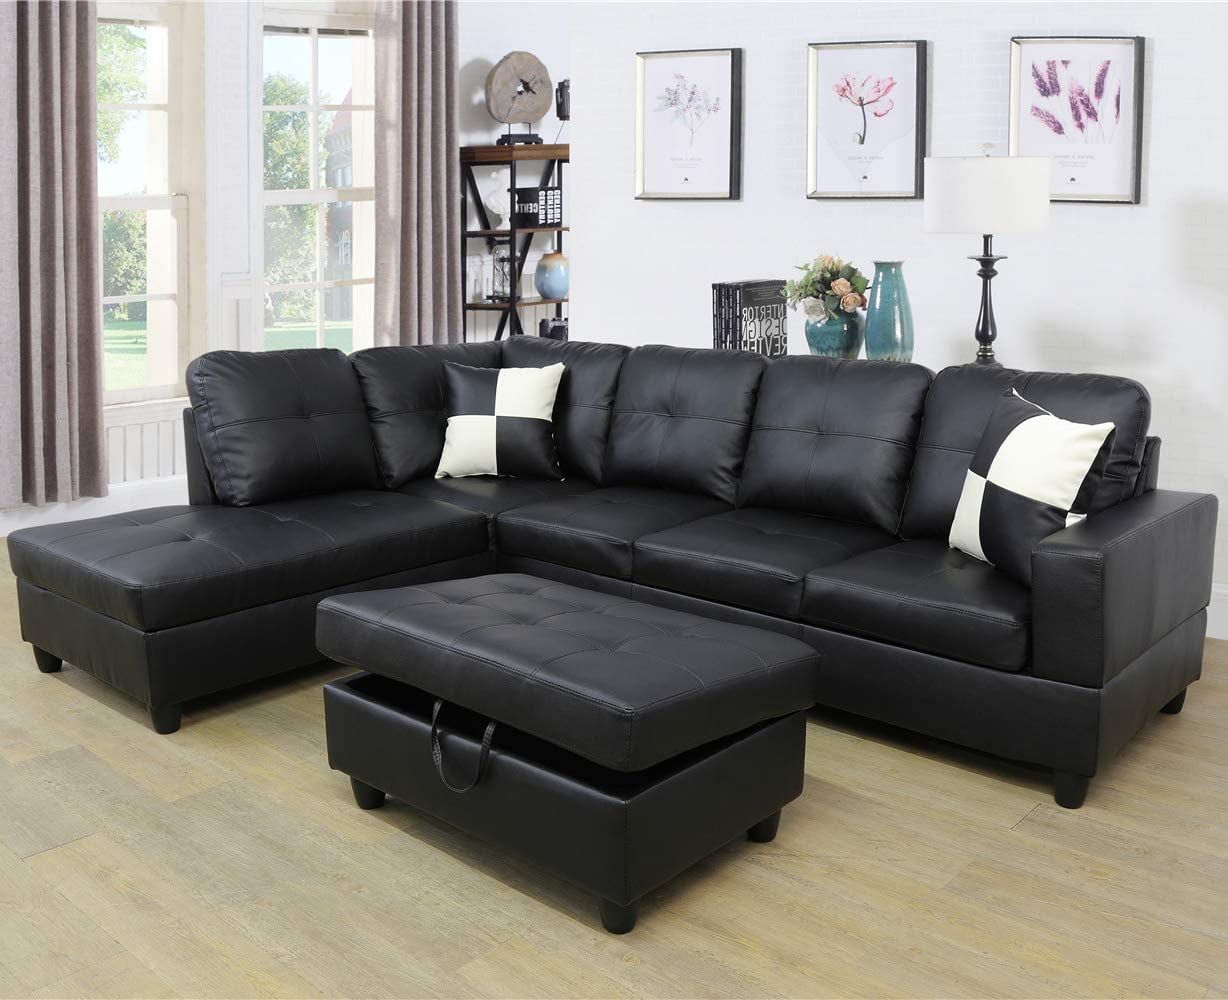 Ainehome Faux Leather Sectional Set, Living Room L Shaped Modern Sofa For Faux Leather Sectional Sofa Sets (View 8 of 21)